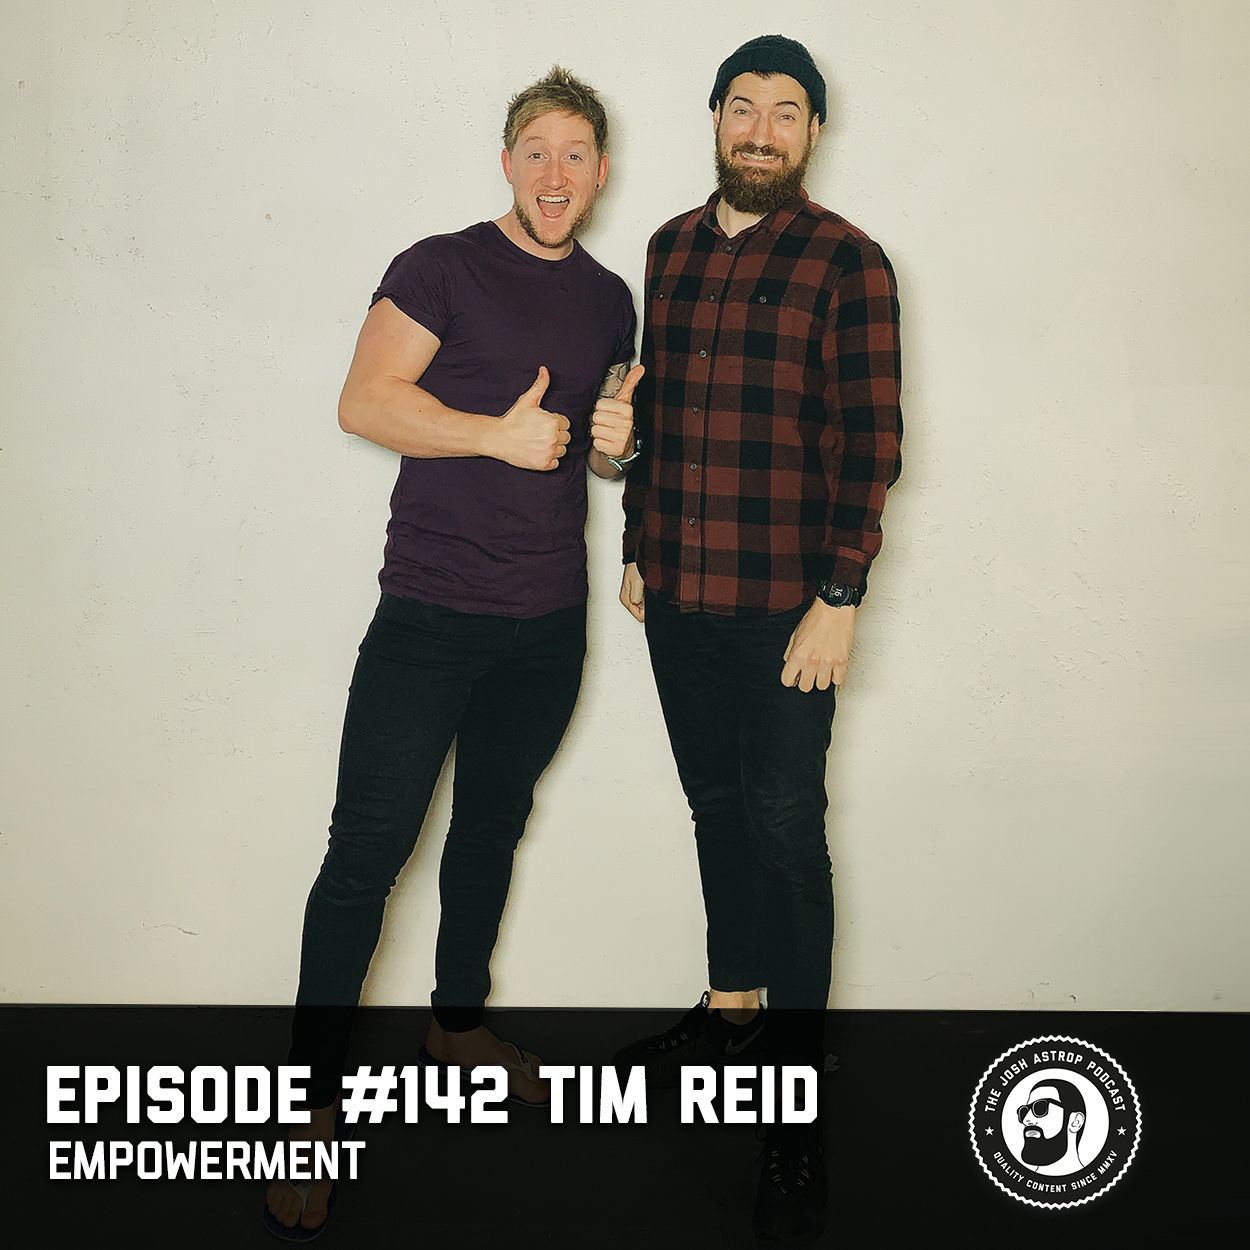 #142 Tim Reid - Performance, motivation and eating what you want (justifying cakes).